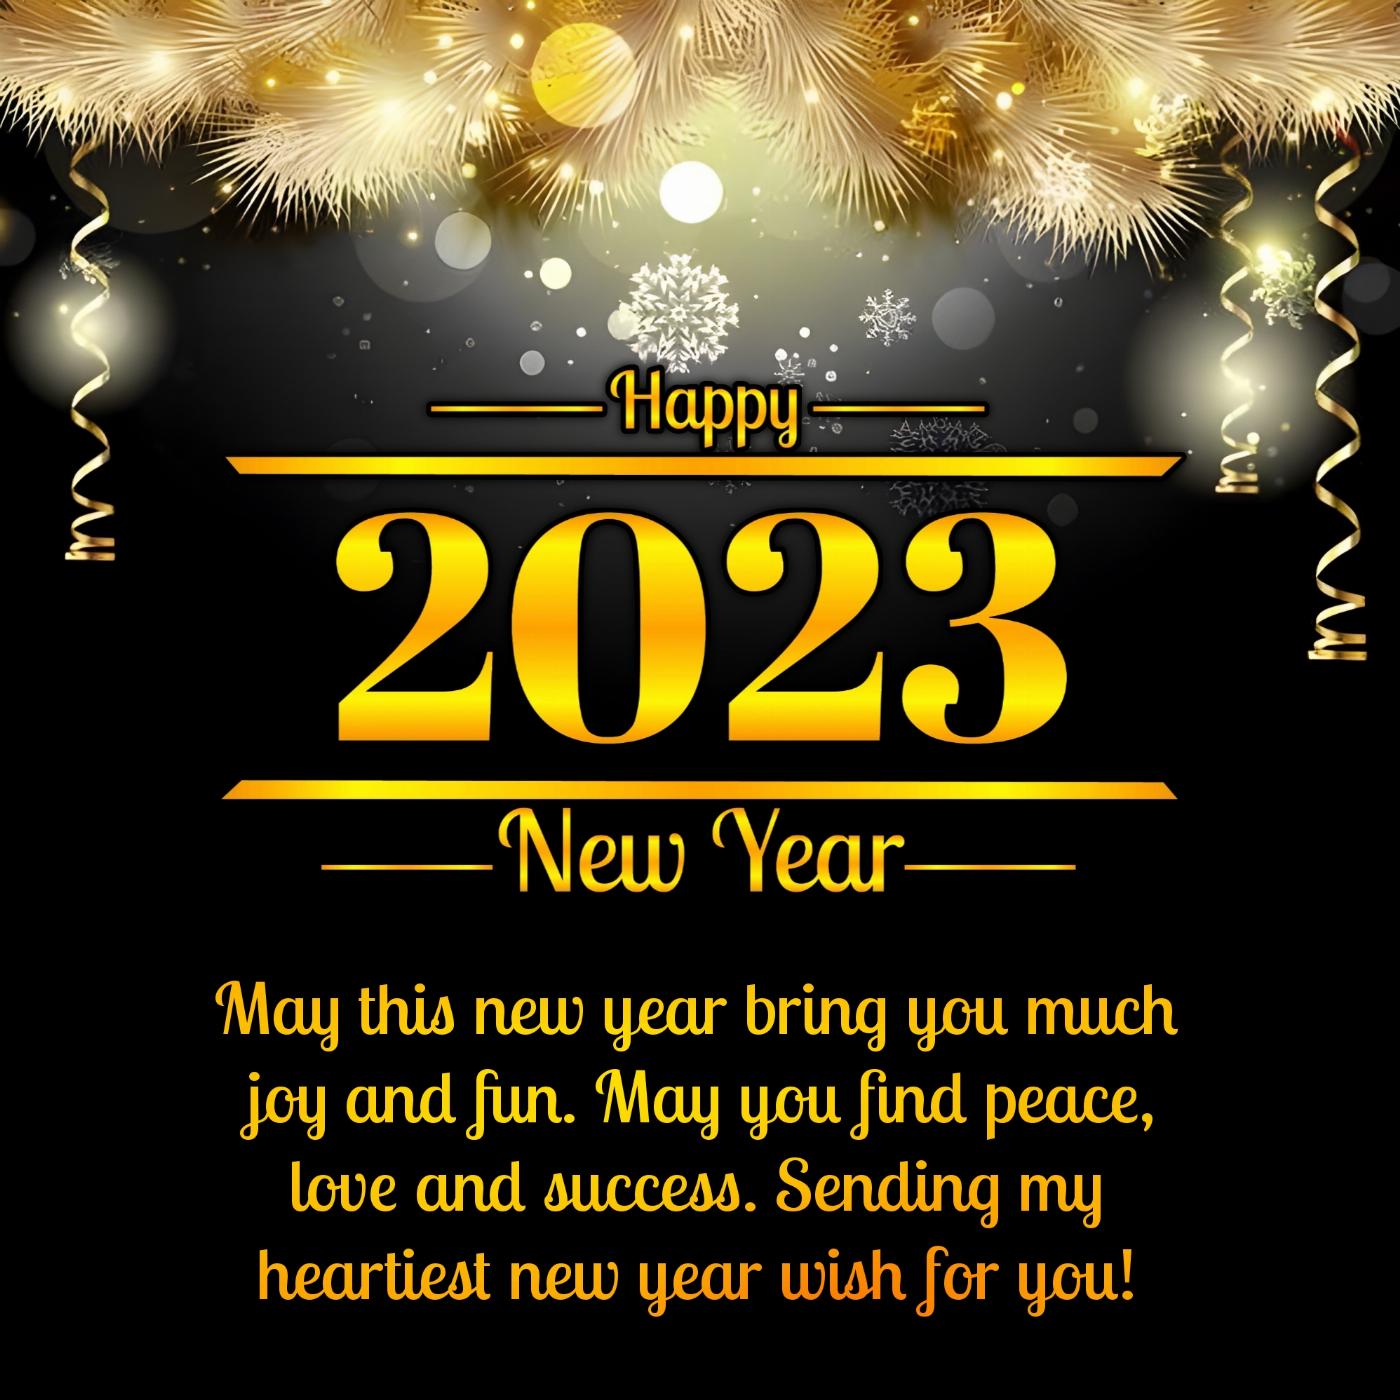 May this new year bring you much joy and fun